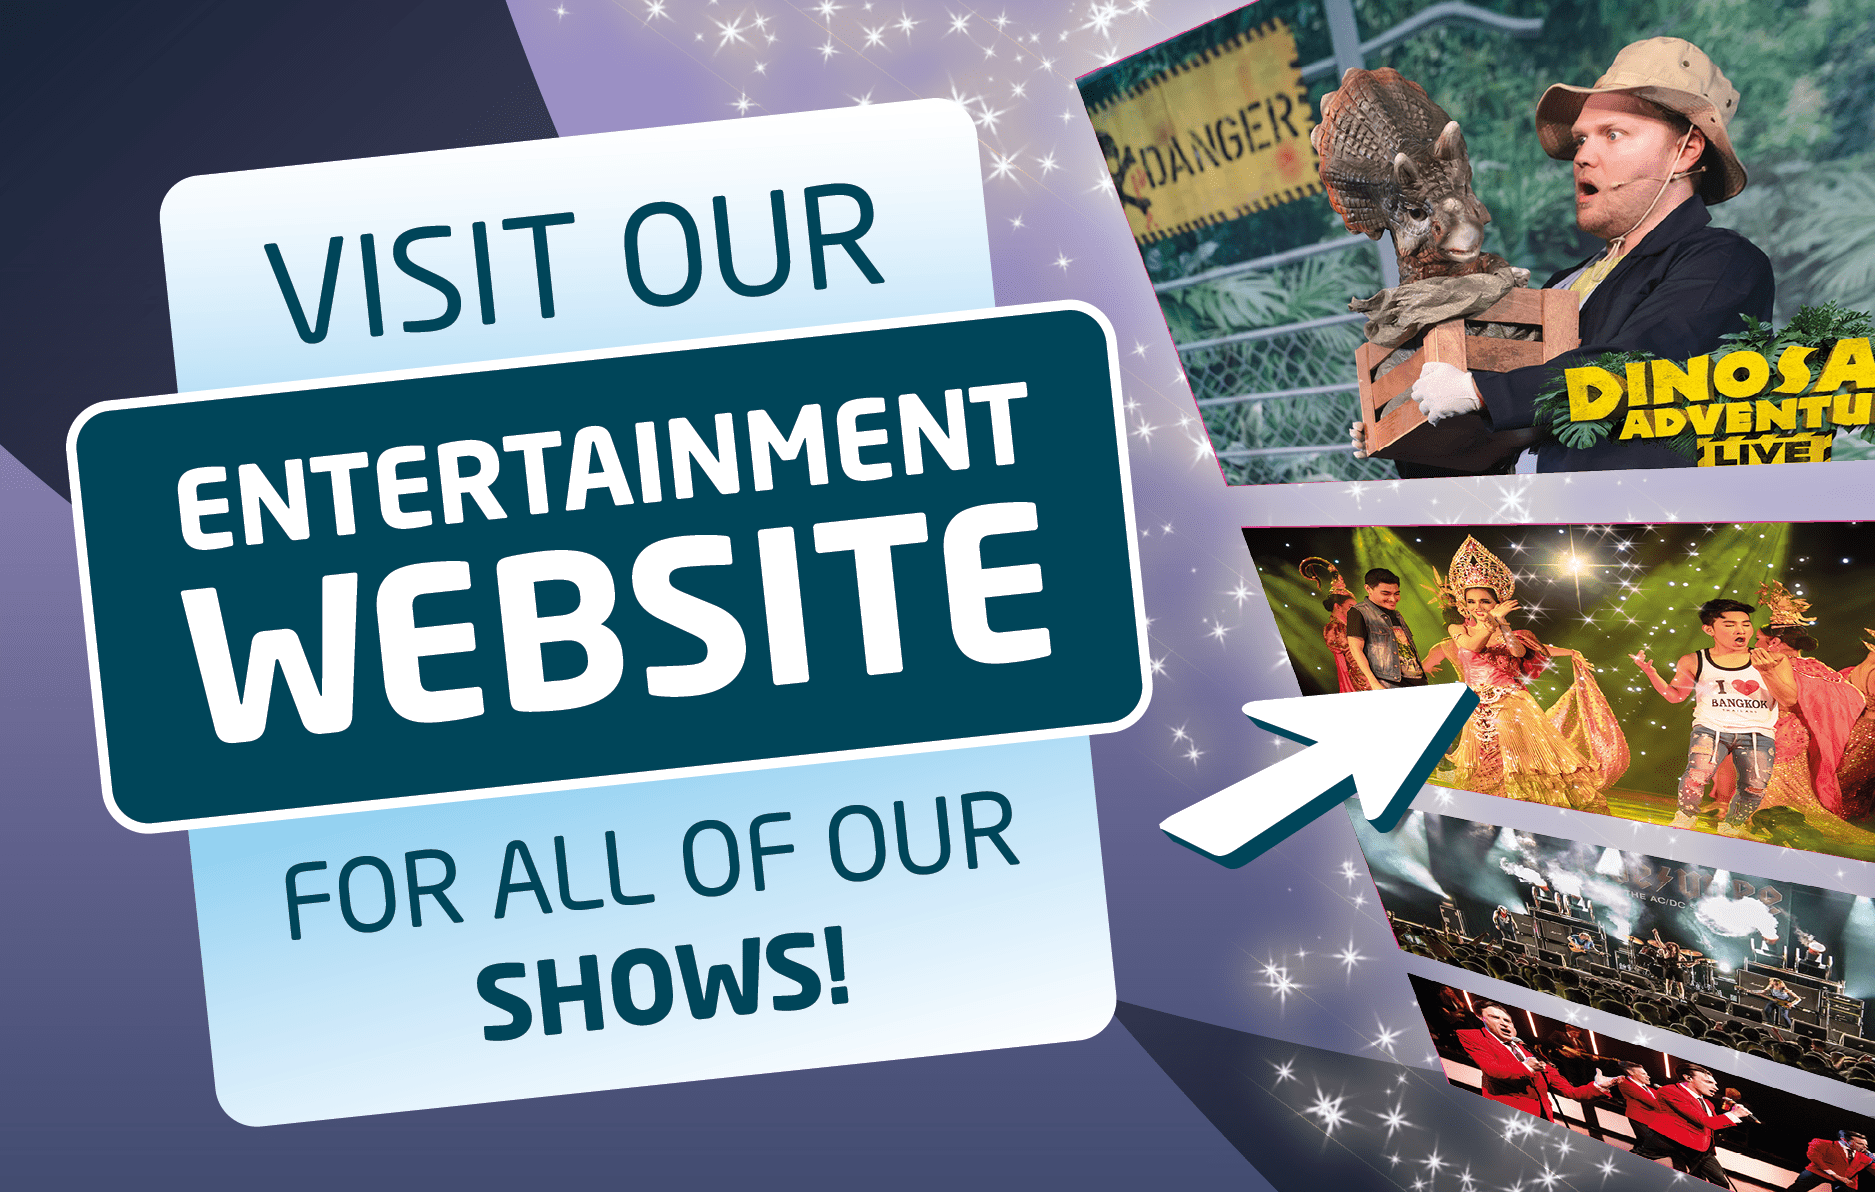 Visit our Entertainment website for all of our shows!